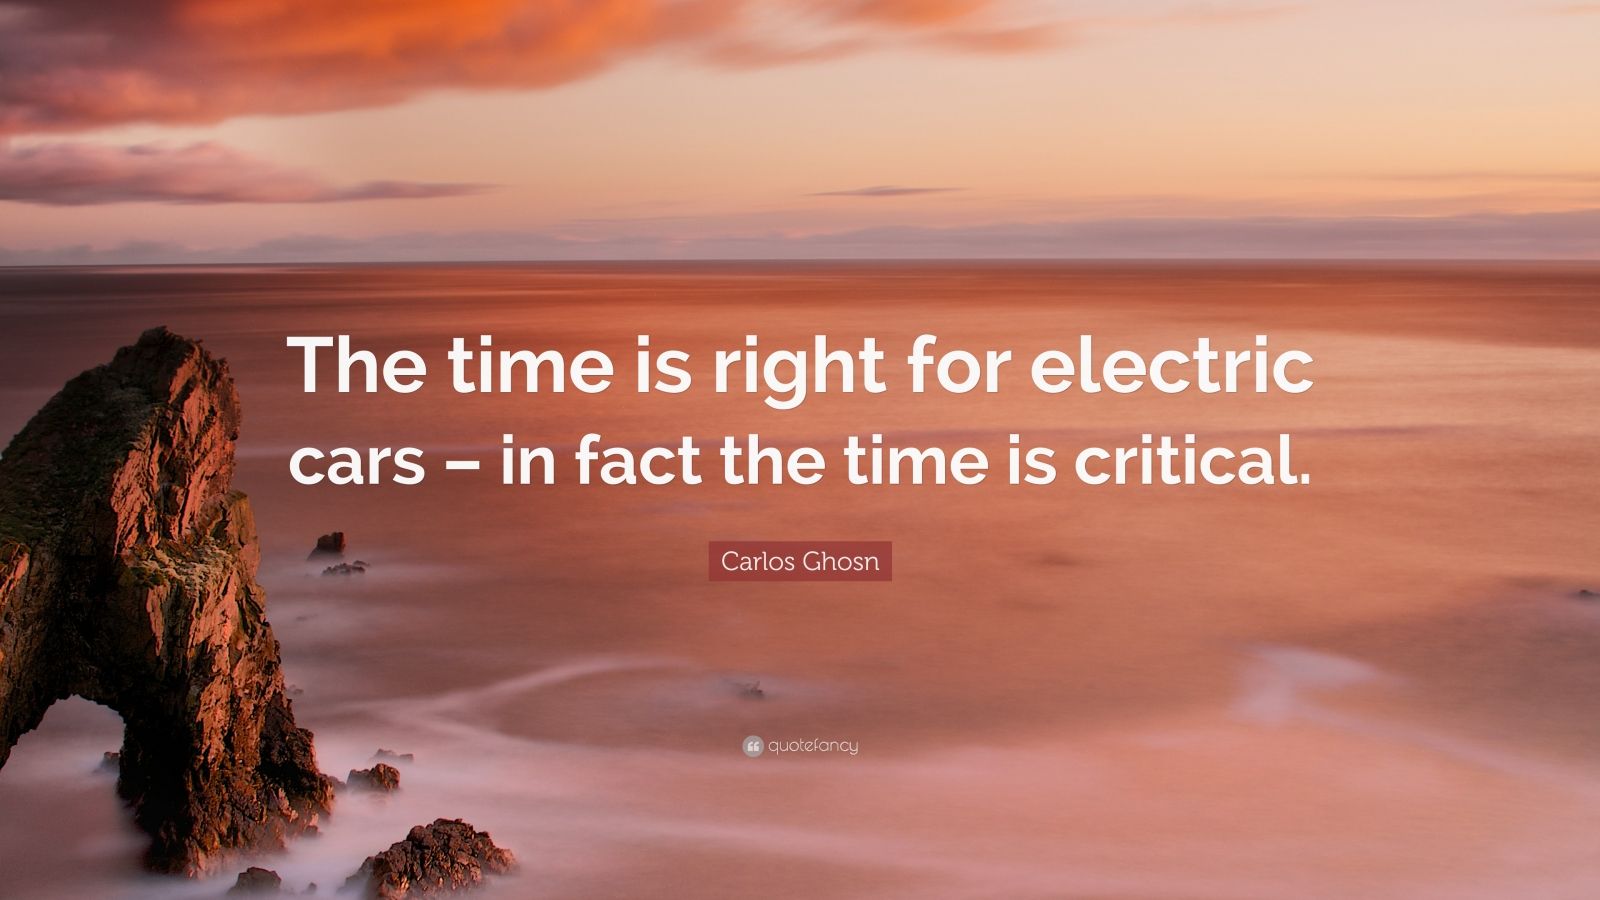 Carlos Ghosn Quote “The time is right for electric cars in fact the